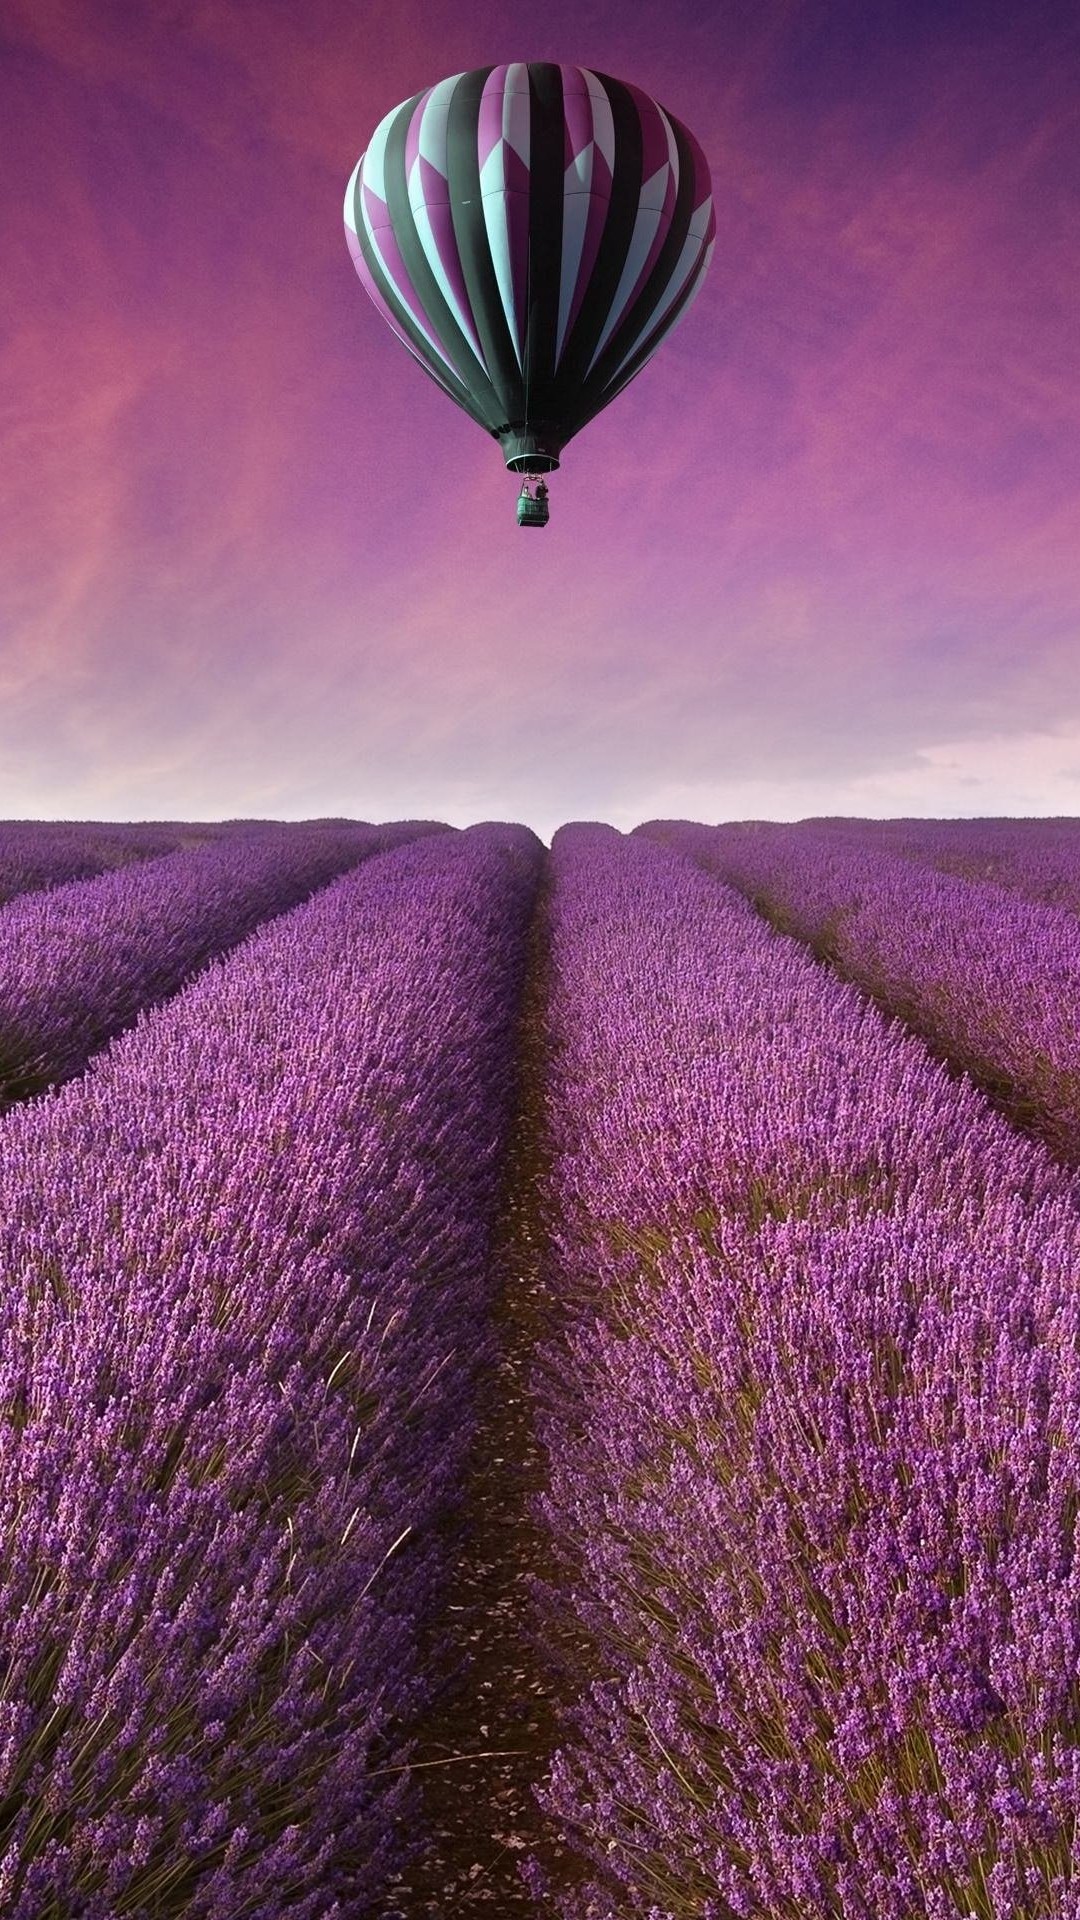 Hot Air Balloon Over Lavender Field Wallpaper for SAMSUNG Galaxy Note 3